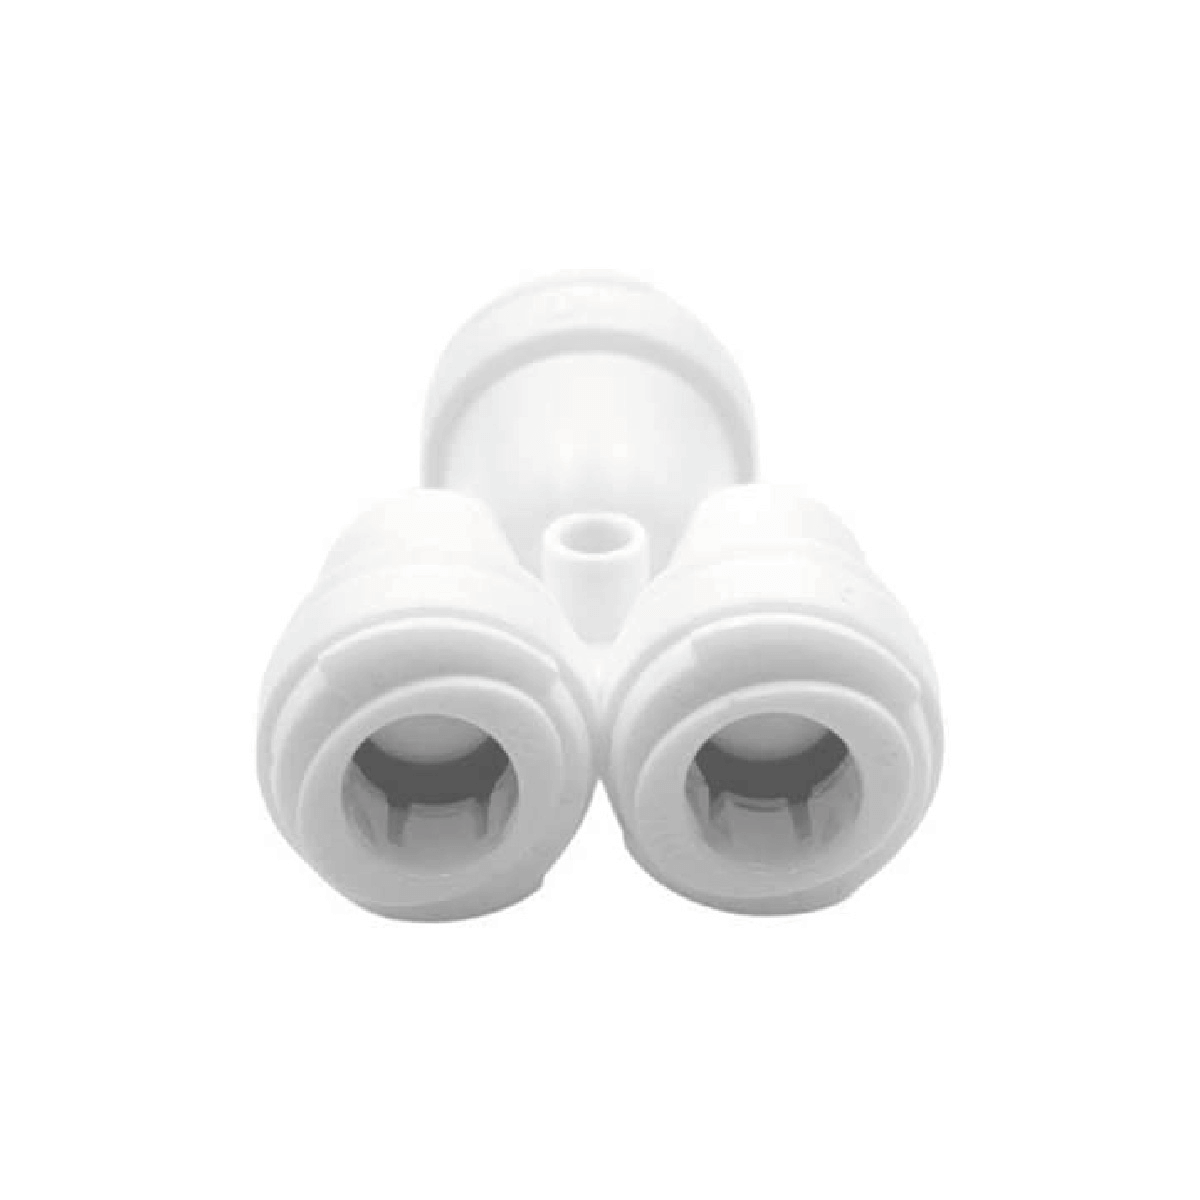 DMfit ATWD Acetal Fitting Two-Way Divider 1/4" , 3/8" Tube OD (10 Pack)